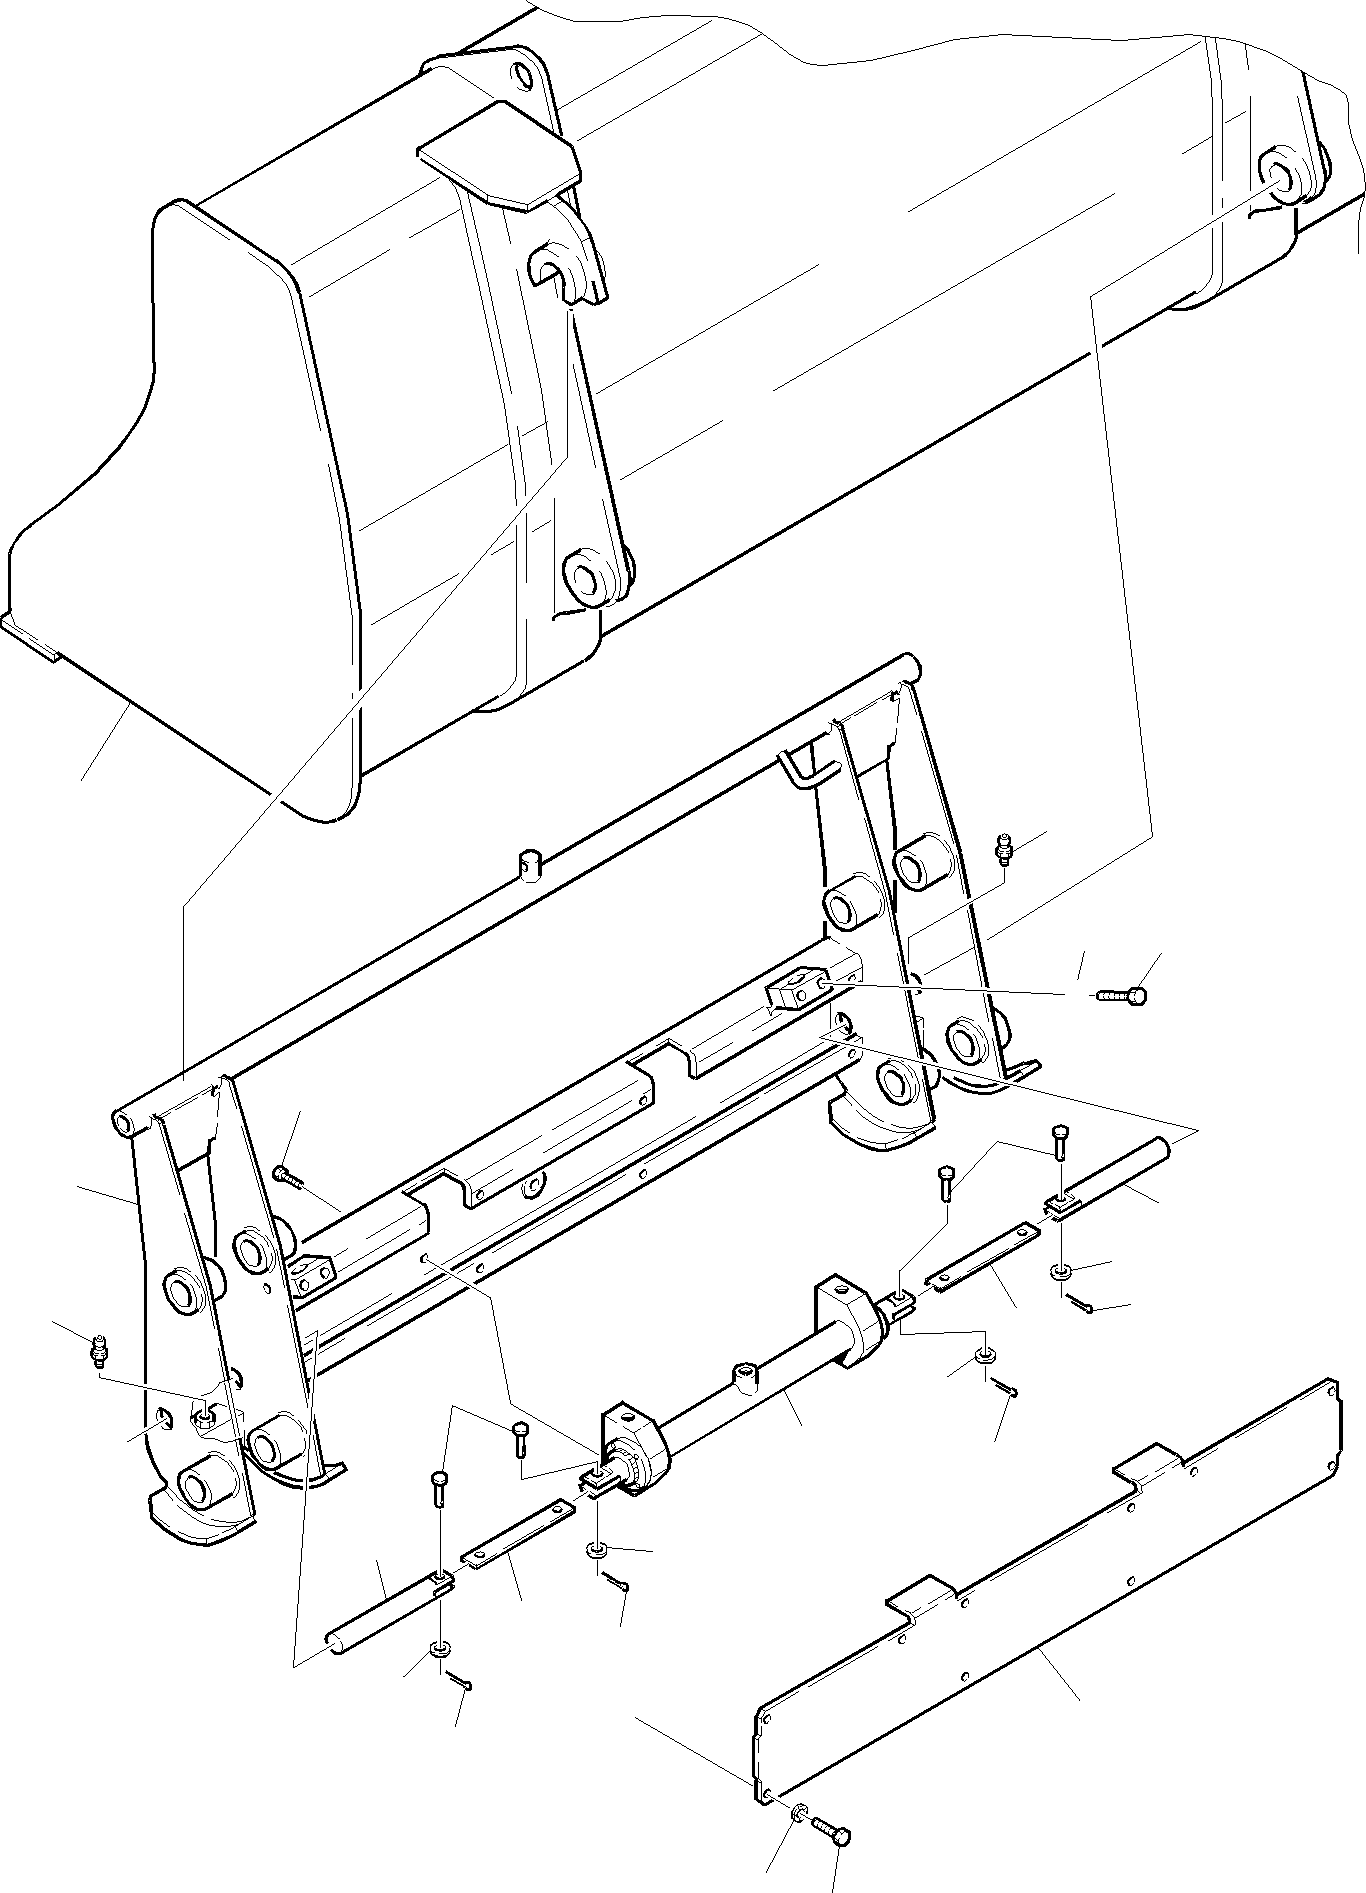 Part 8. QUICK HYDRAULIC COUPLING FOR BUCKET (OPTIONAL) [7040]